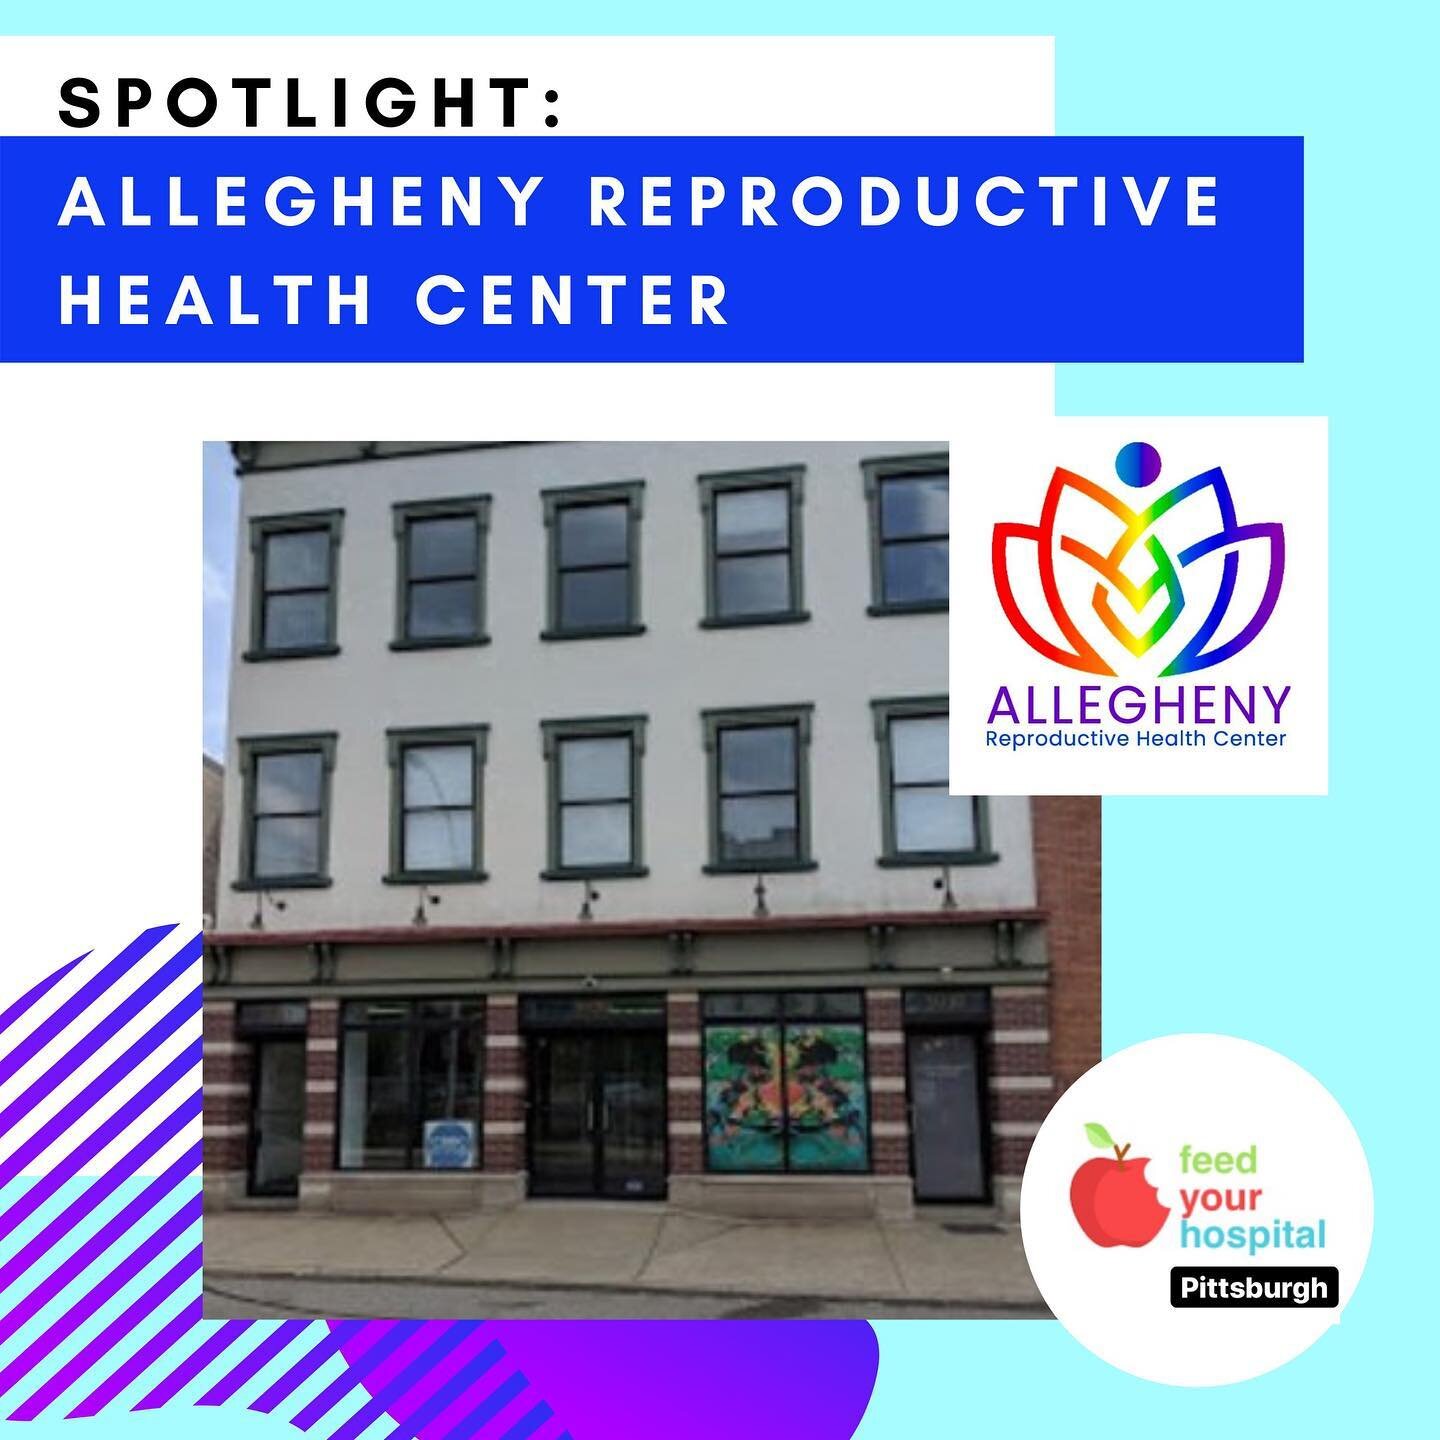 We are honored to be delivering meals to Allegheny Reproductive Health Center over the next few weeks. The center was founded in 1975 and has been a staple of the community since; one google review shares, &quot;I absolutely adore this place and ever